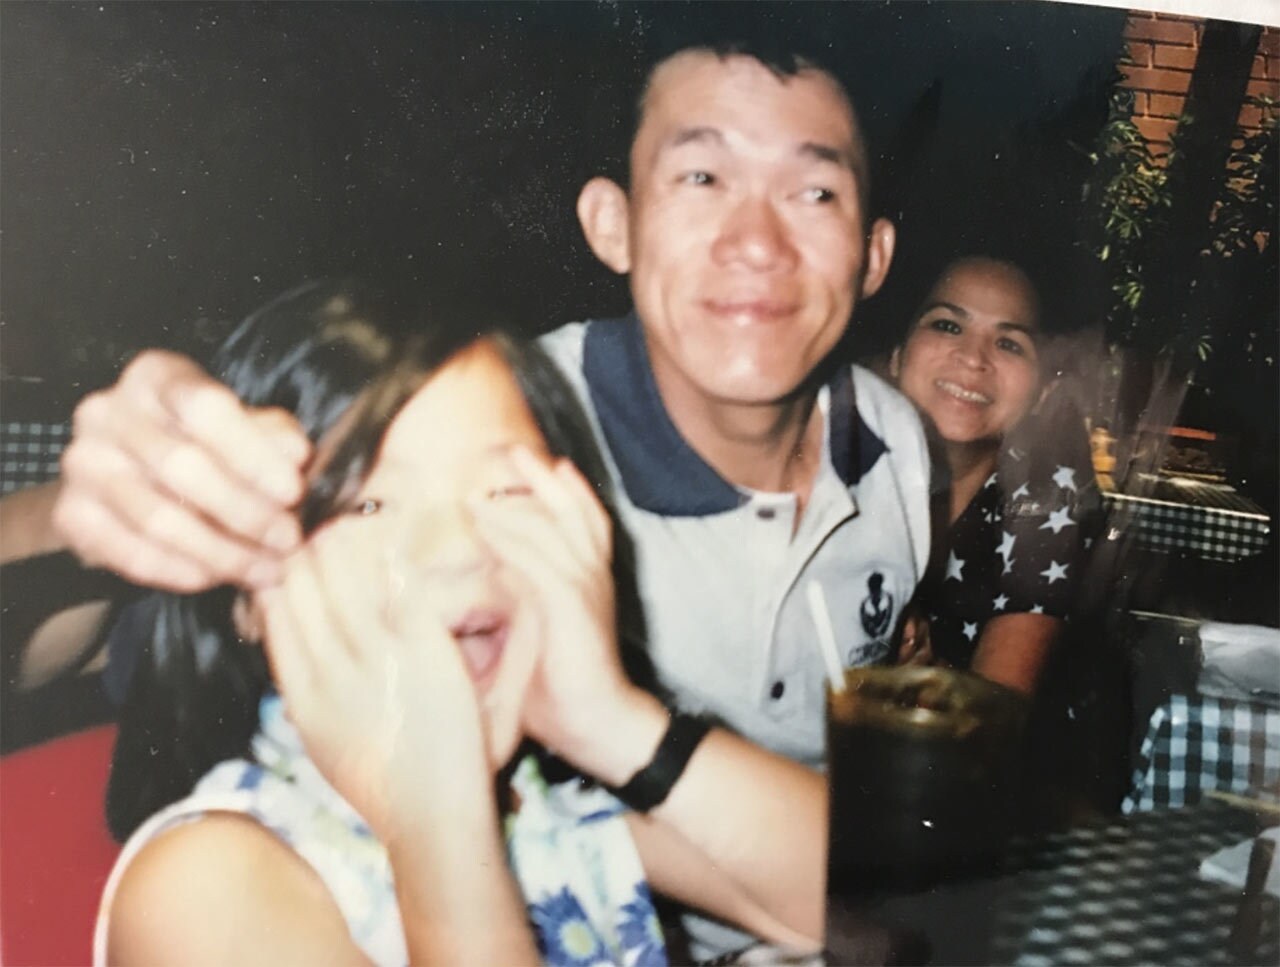 A young picture of Kelly Marie Tran with her parents.